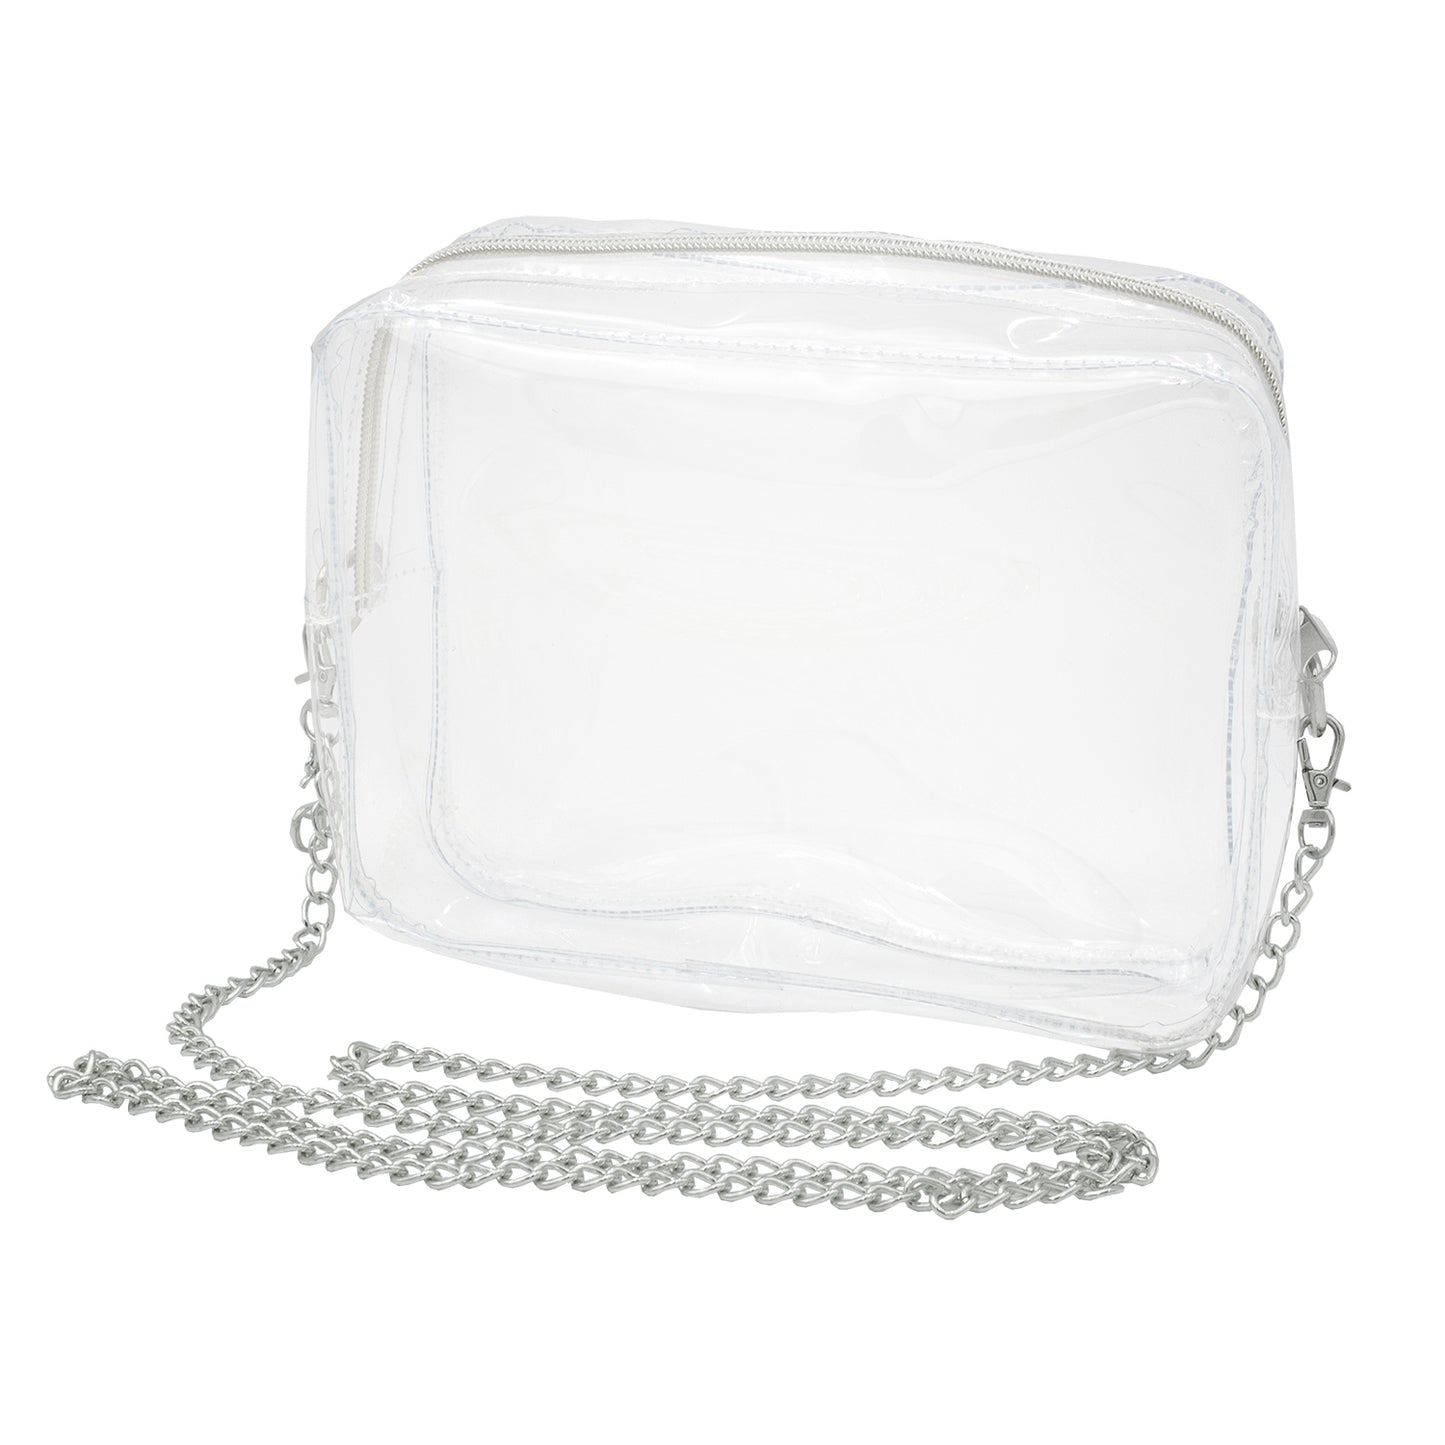 Clear Crossbody Bag with Silver Accents